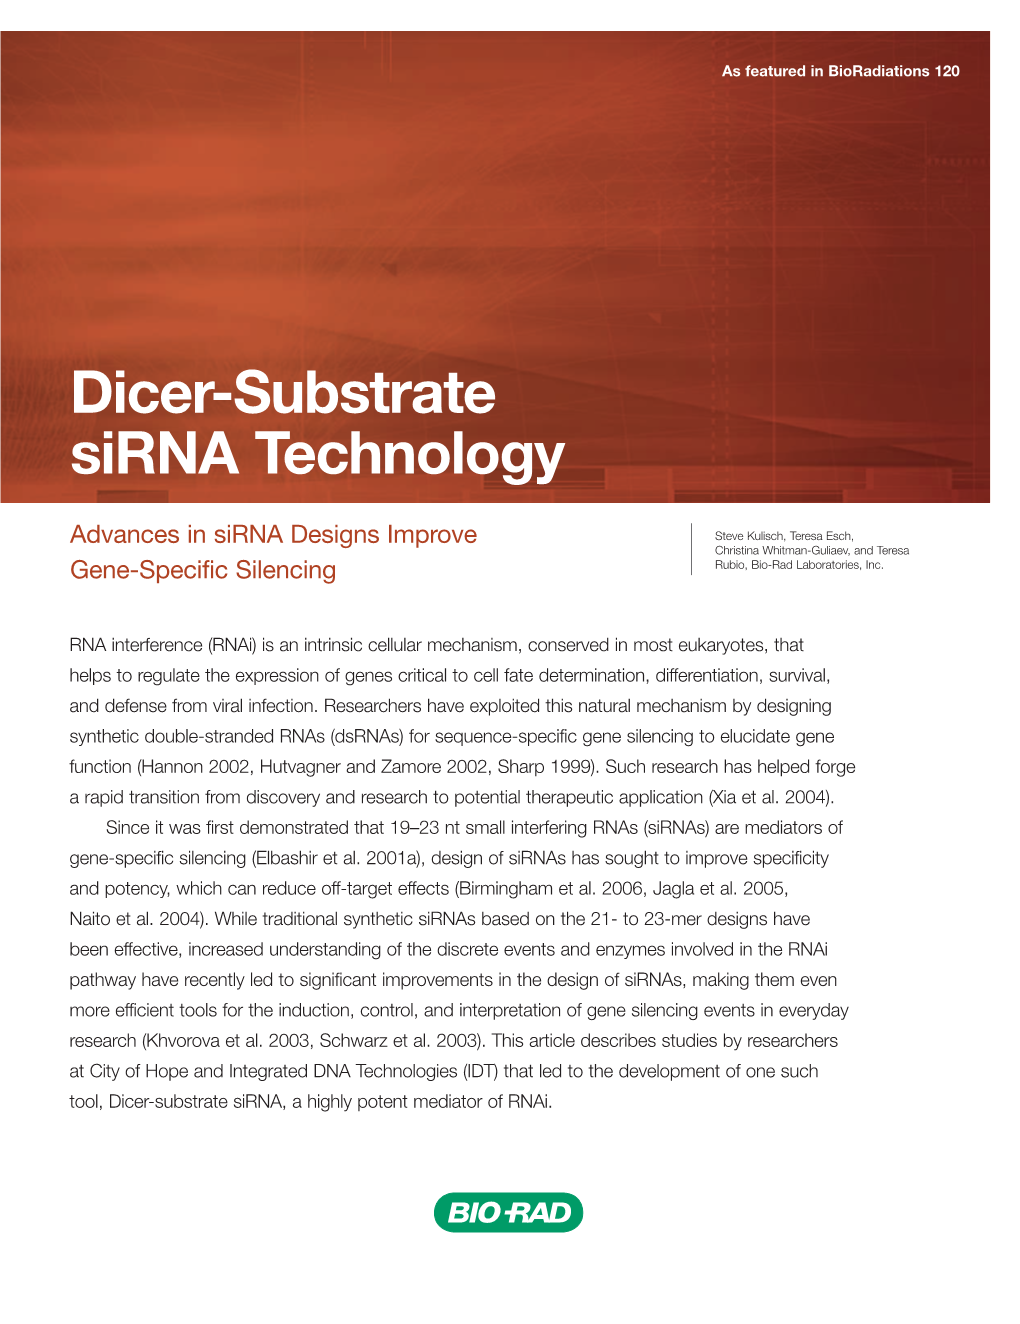 Dicer-Substrate Sirna Technology